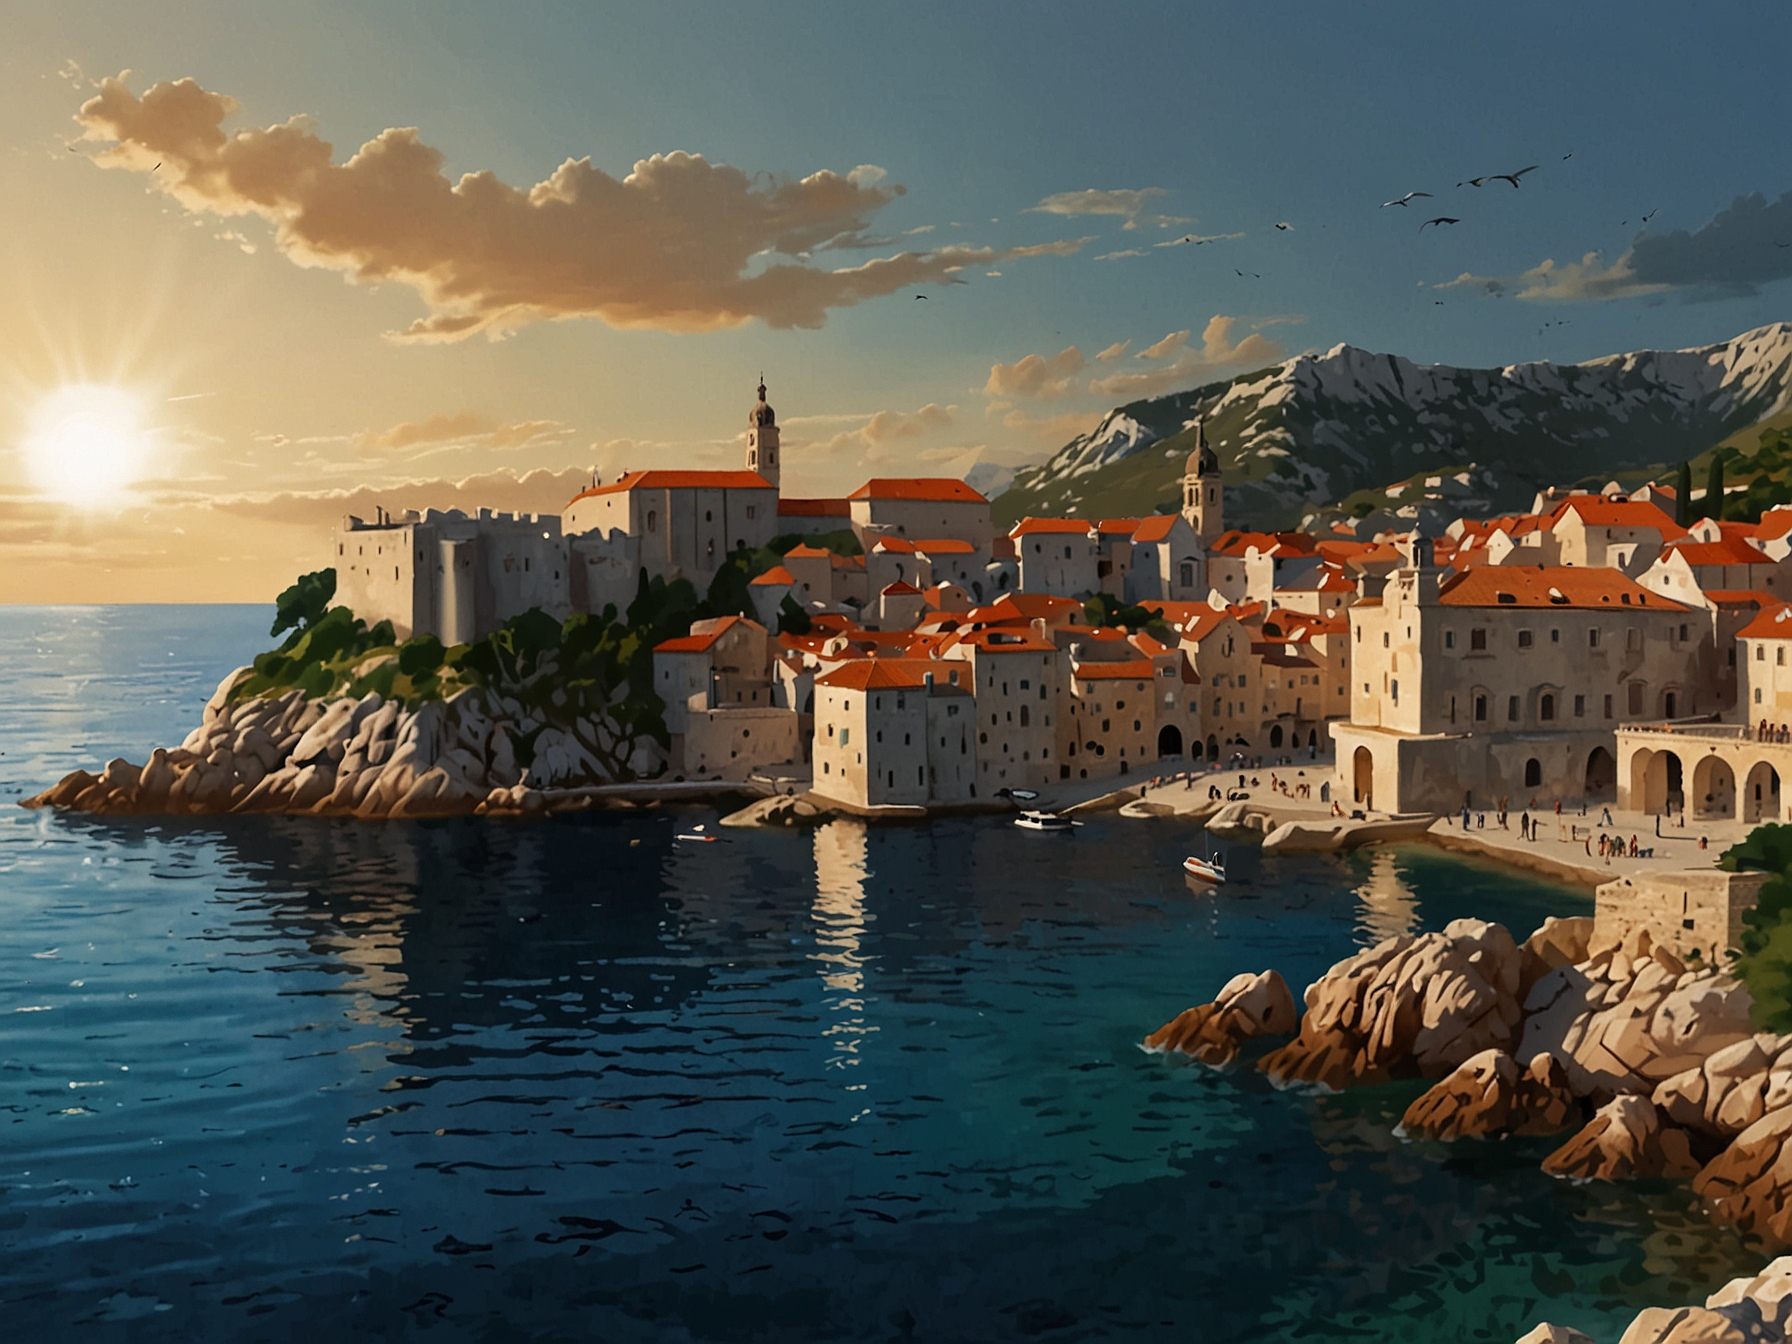 The breathtakingly preserved old town of Dubrovnik at sunset, with its medieval architecture, fortified walls, and terracotta rooftops set against the deep blue waters of the Adriatic Sea.